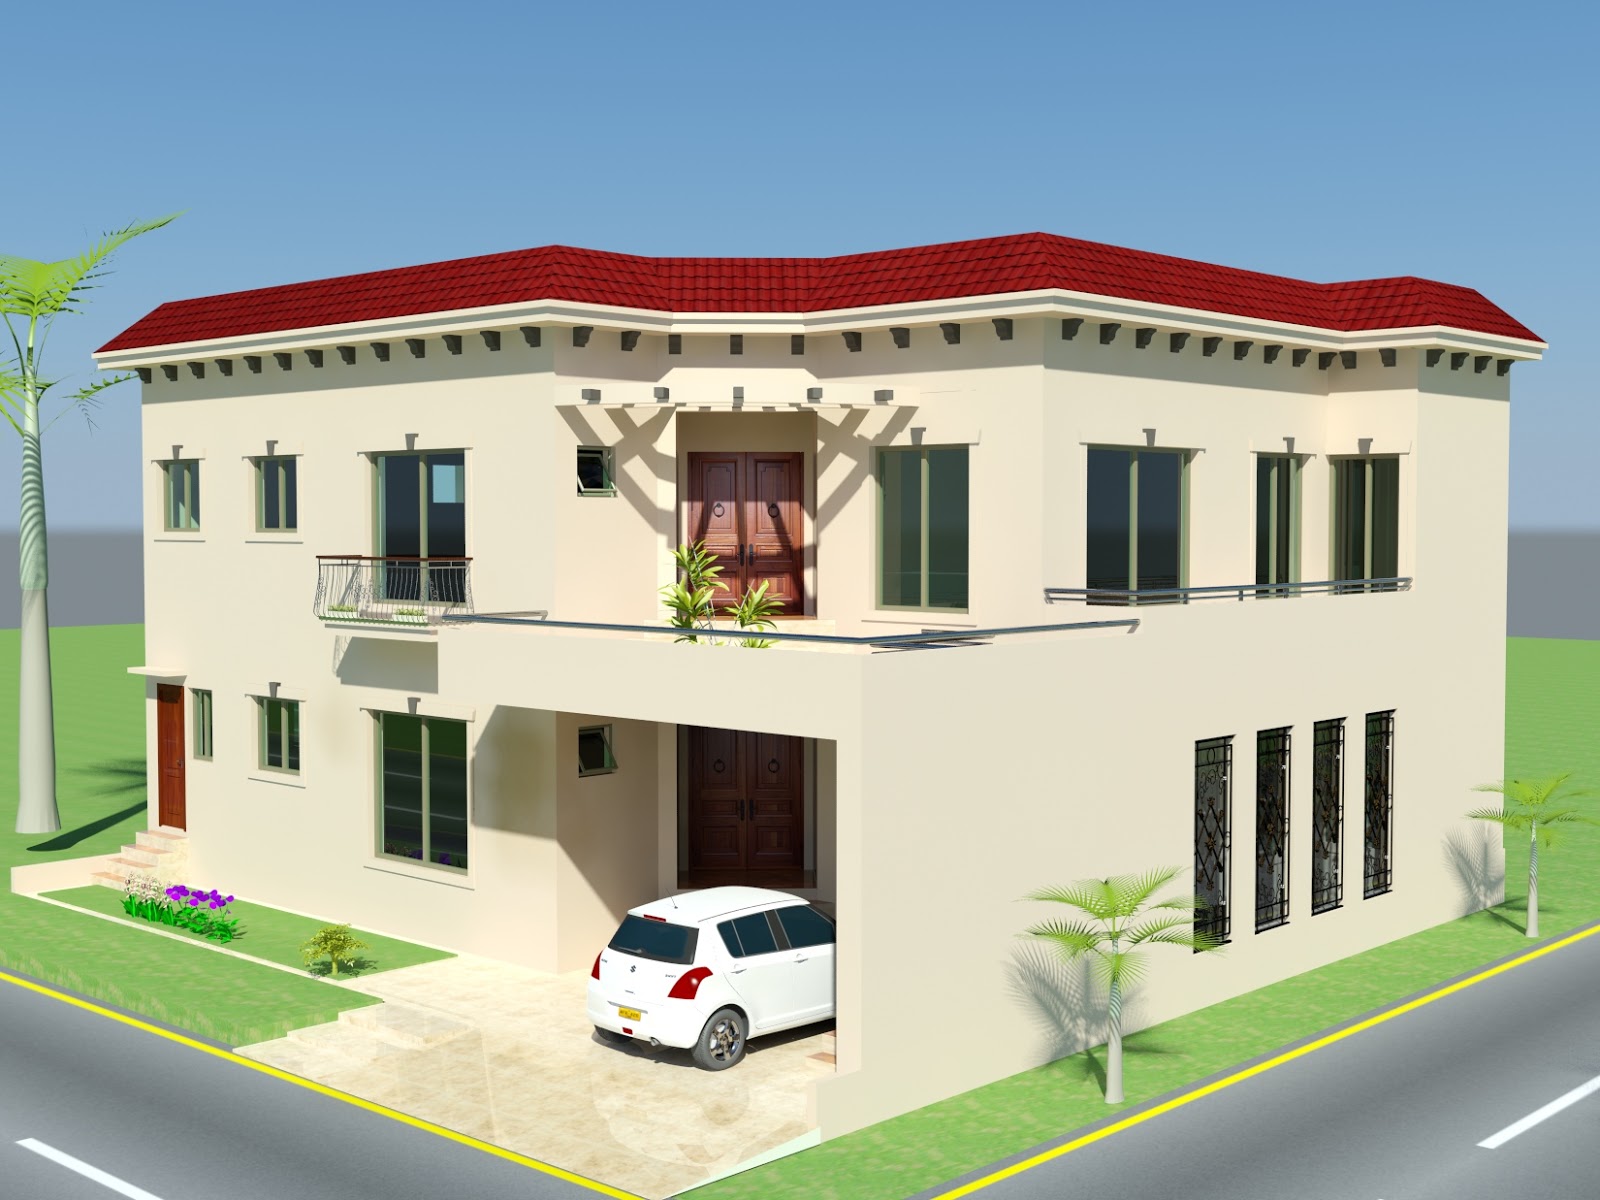 Architecture Design Of Houses In Pakistan Home Pattern